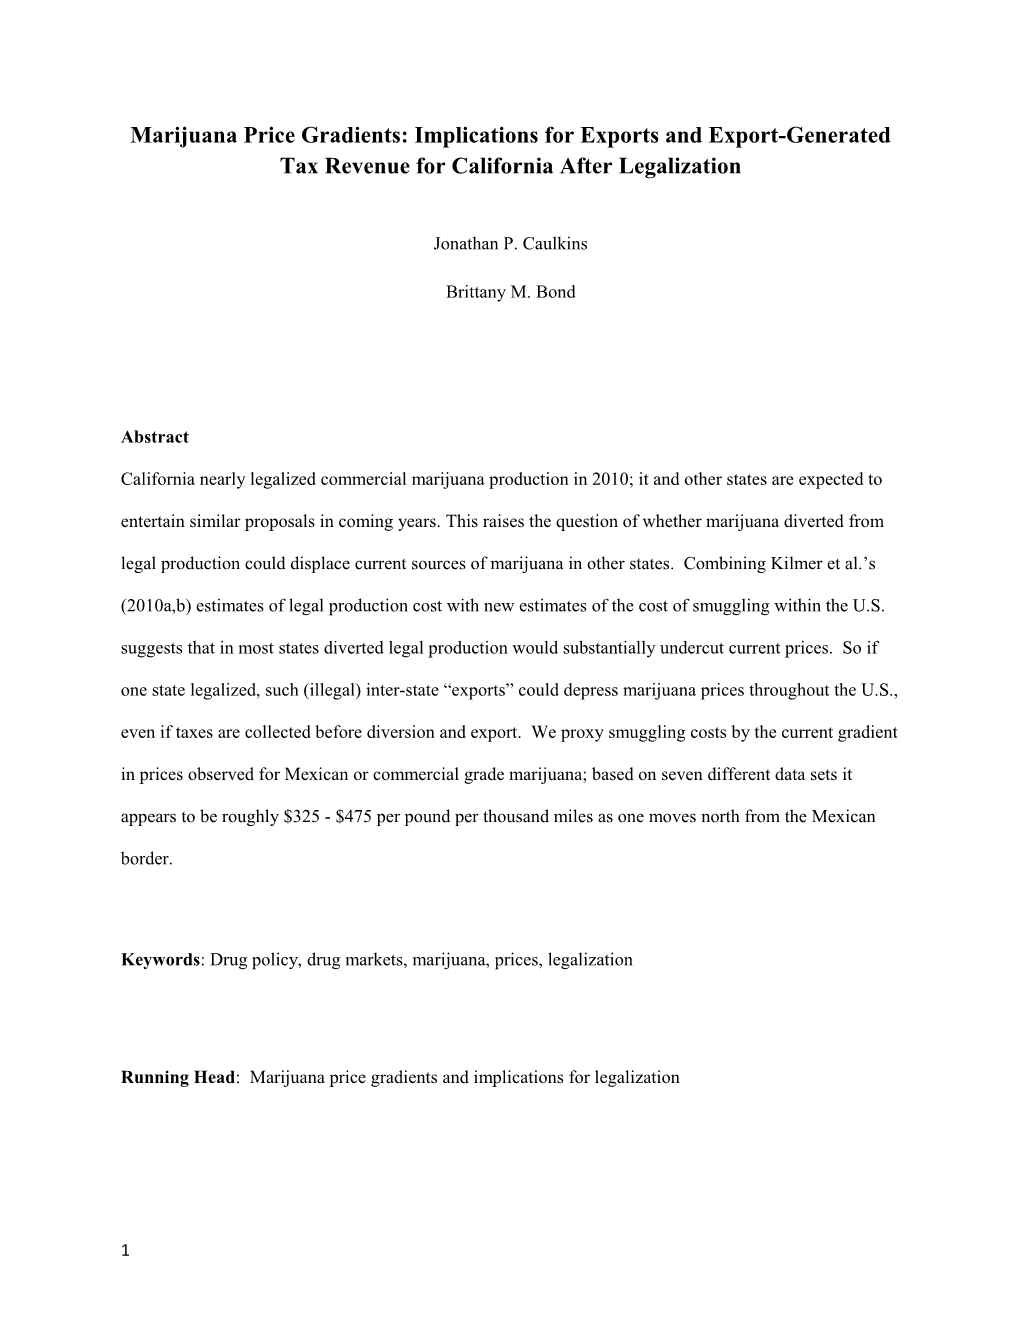 Marijuana Price Gradients: Implications for Exports and Export-Generated Tax Revenue For